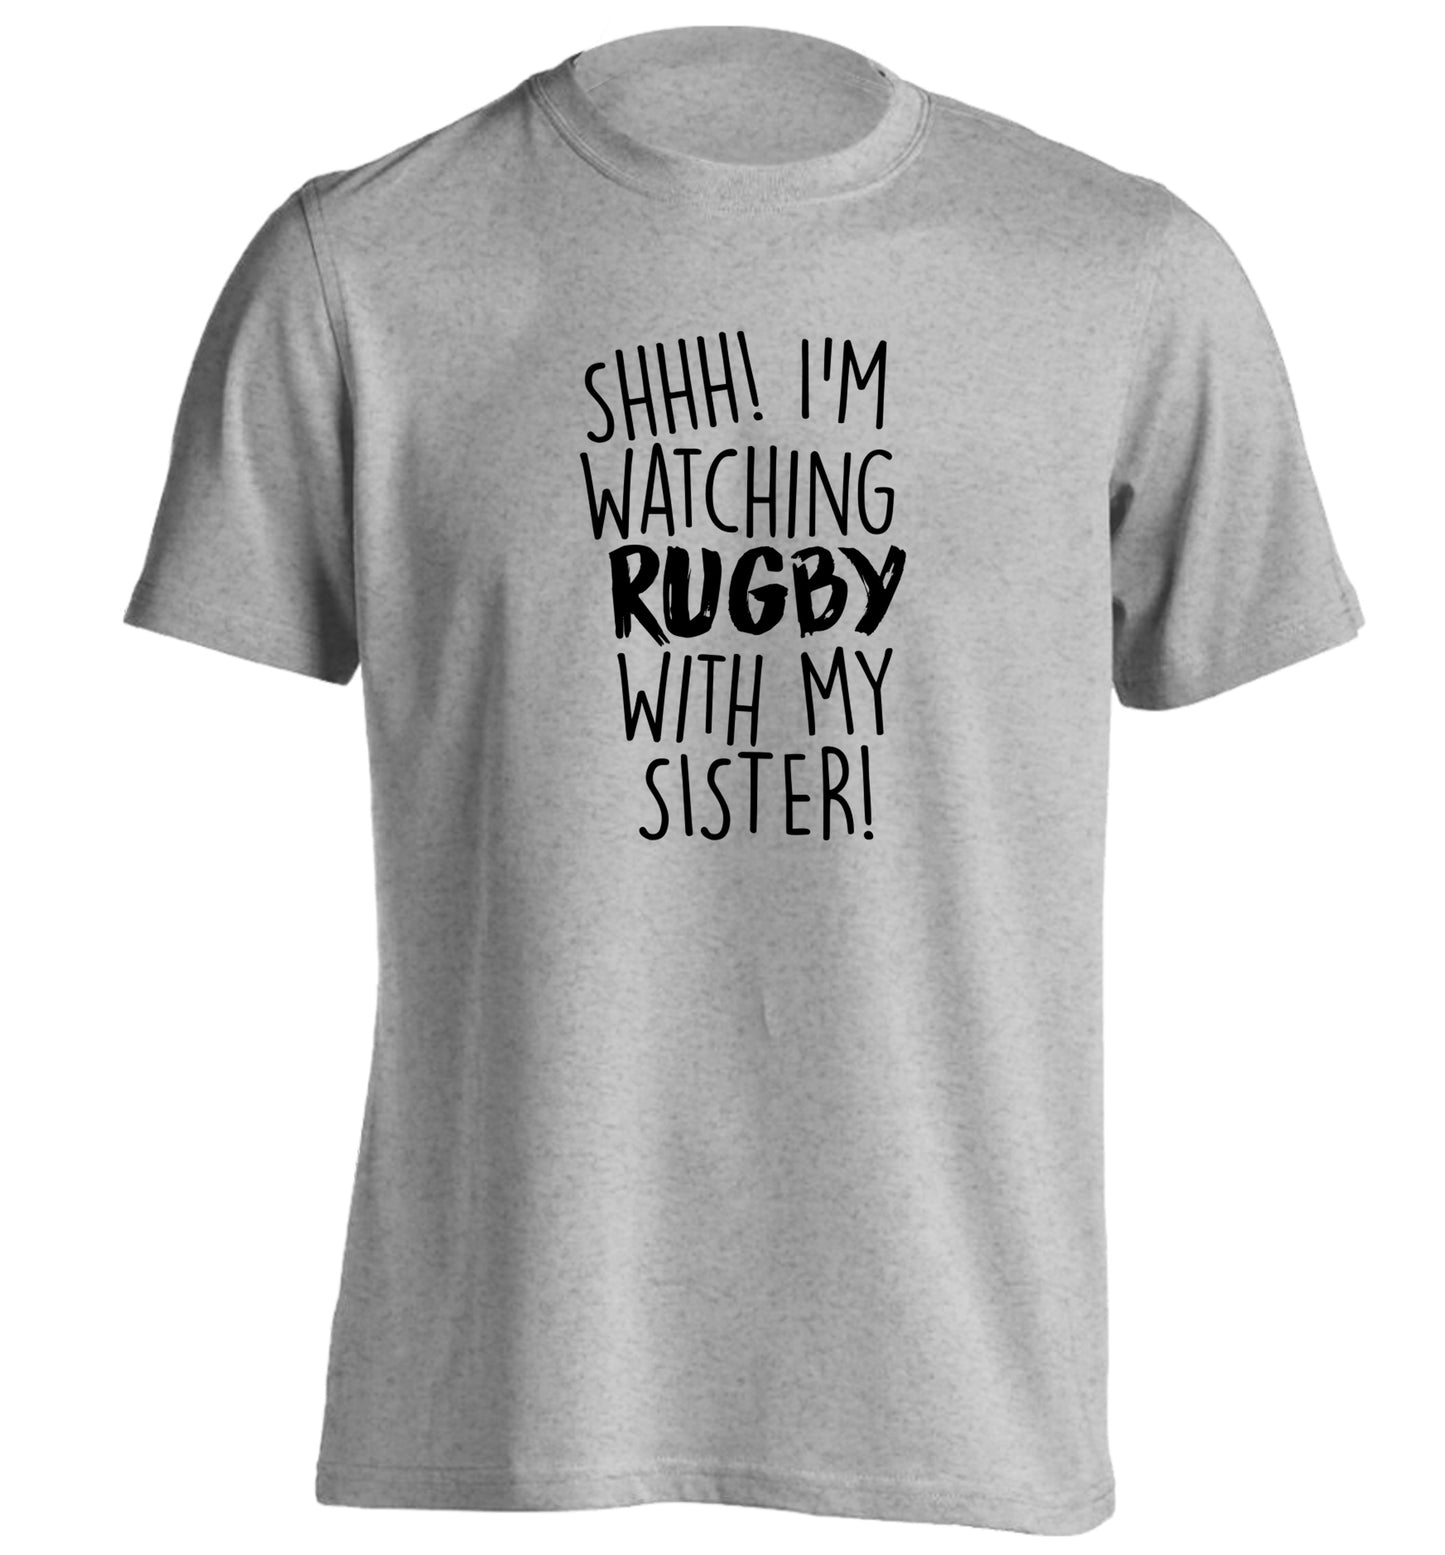 Shh... I'm watching rugby with my sister adults unisex grey Tshirt 2XL